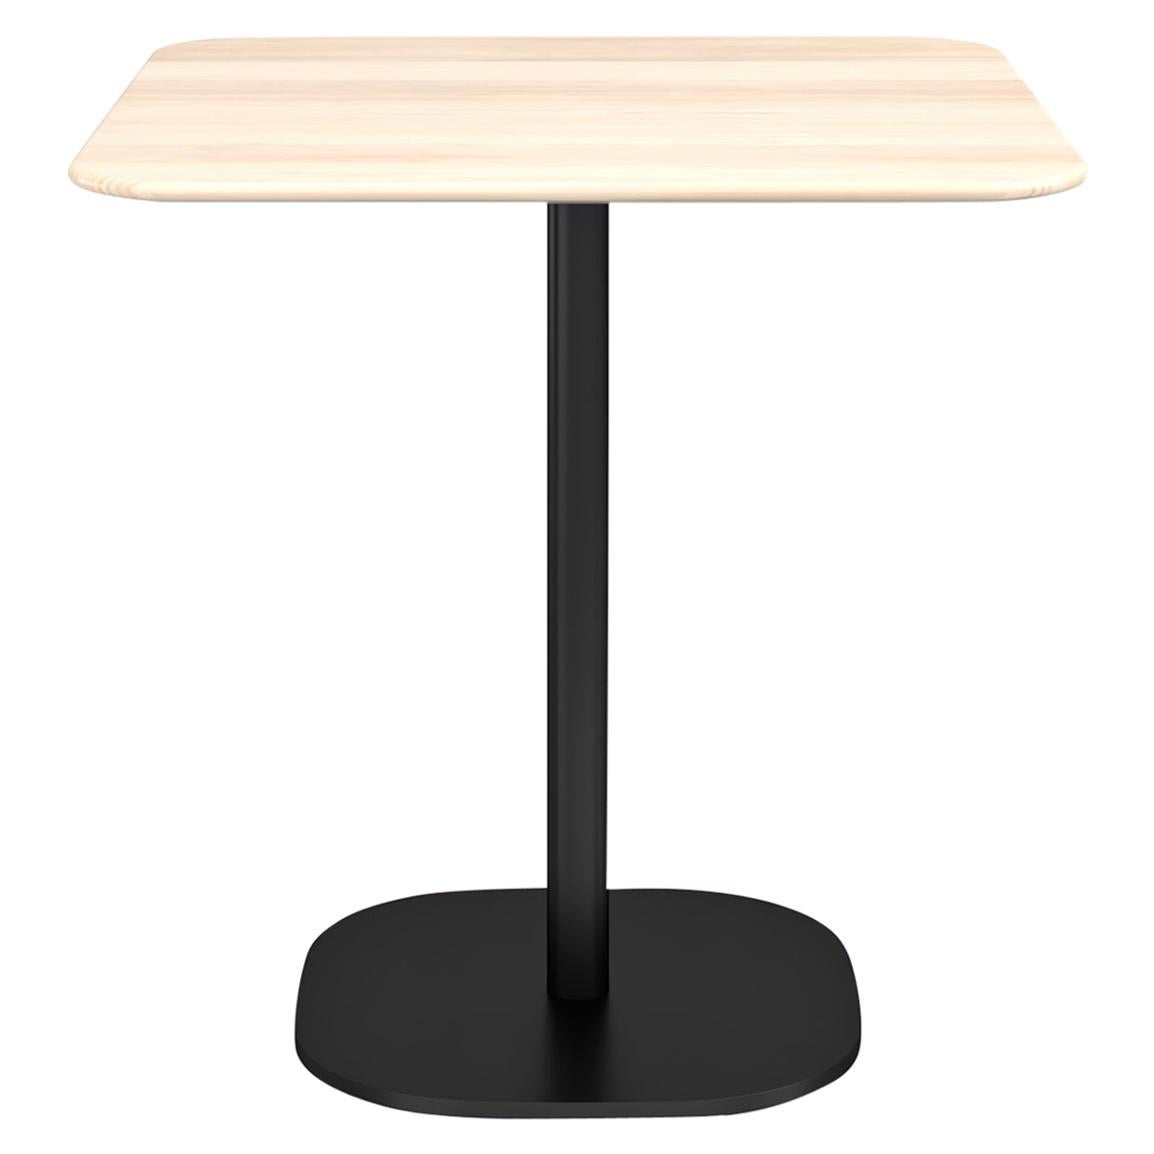 Emeco 2 Inch Large Cafe Table with Black Legs & Wood Top by Jasper Morrison